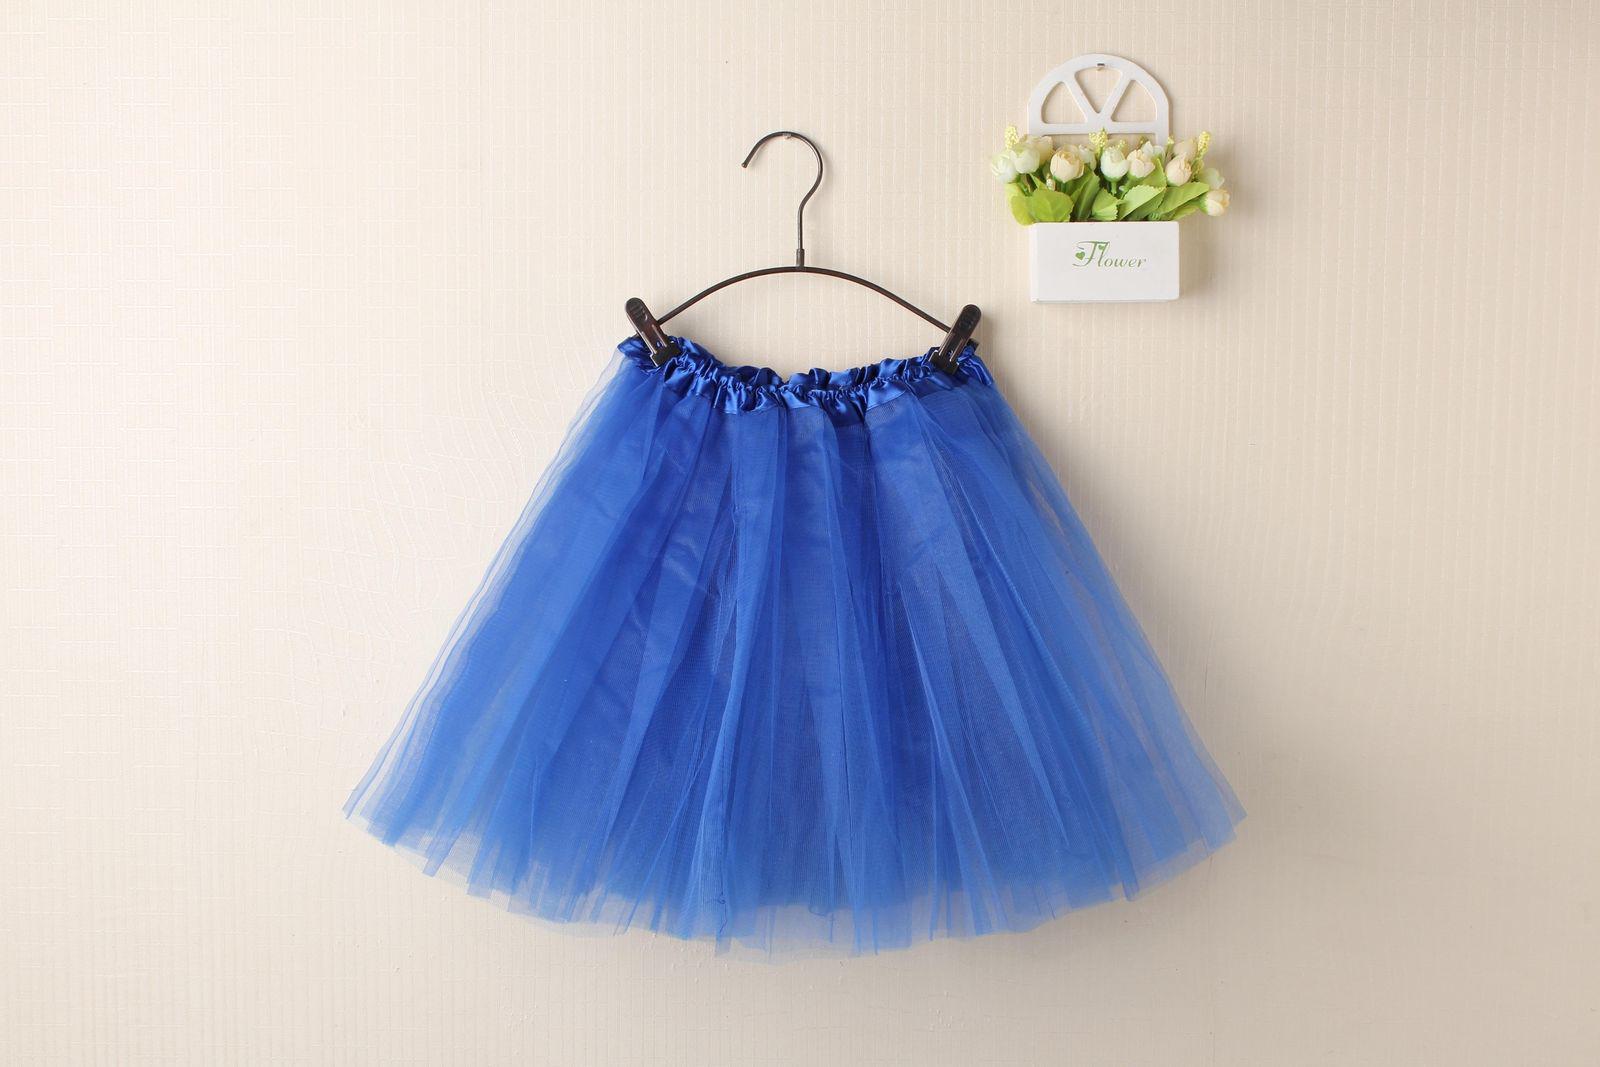 New Adults Tulle Tutu Skirt Dressup Party Costume Ballet Womens Girls Dance Wear - Royal Blue (Size: Kids)